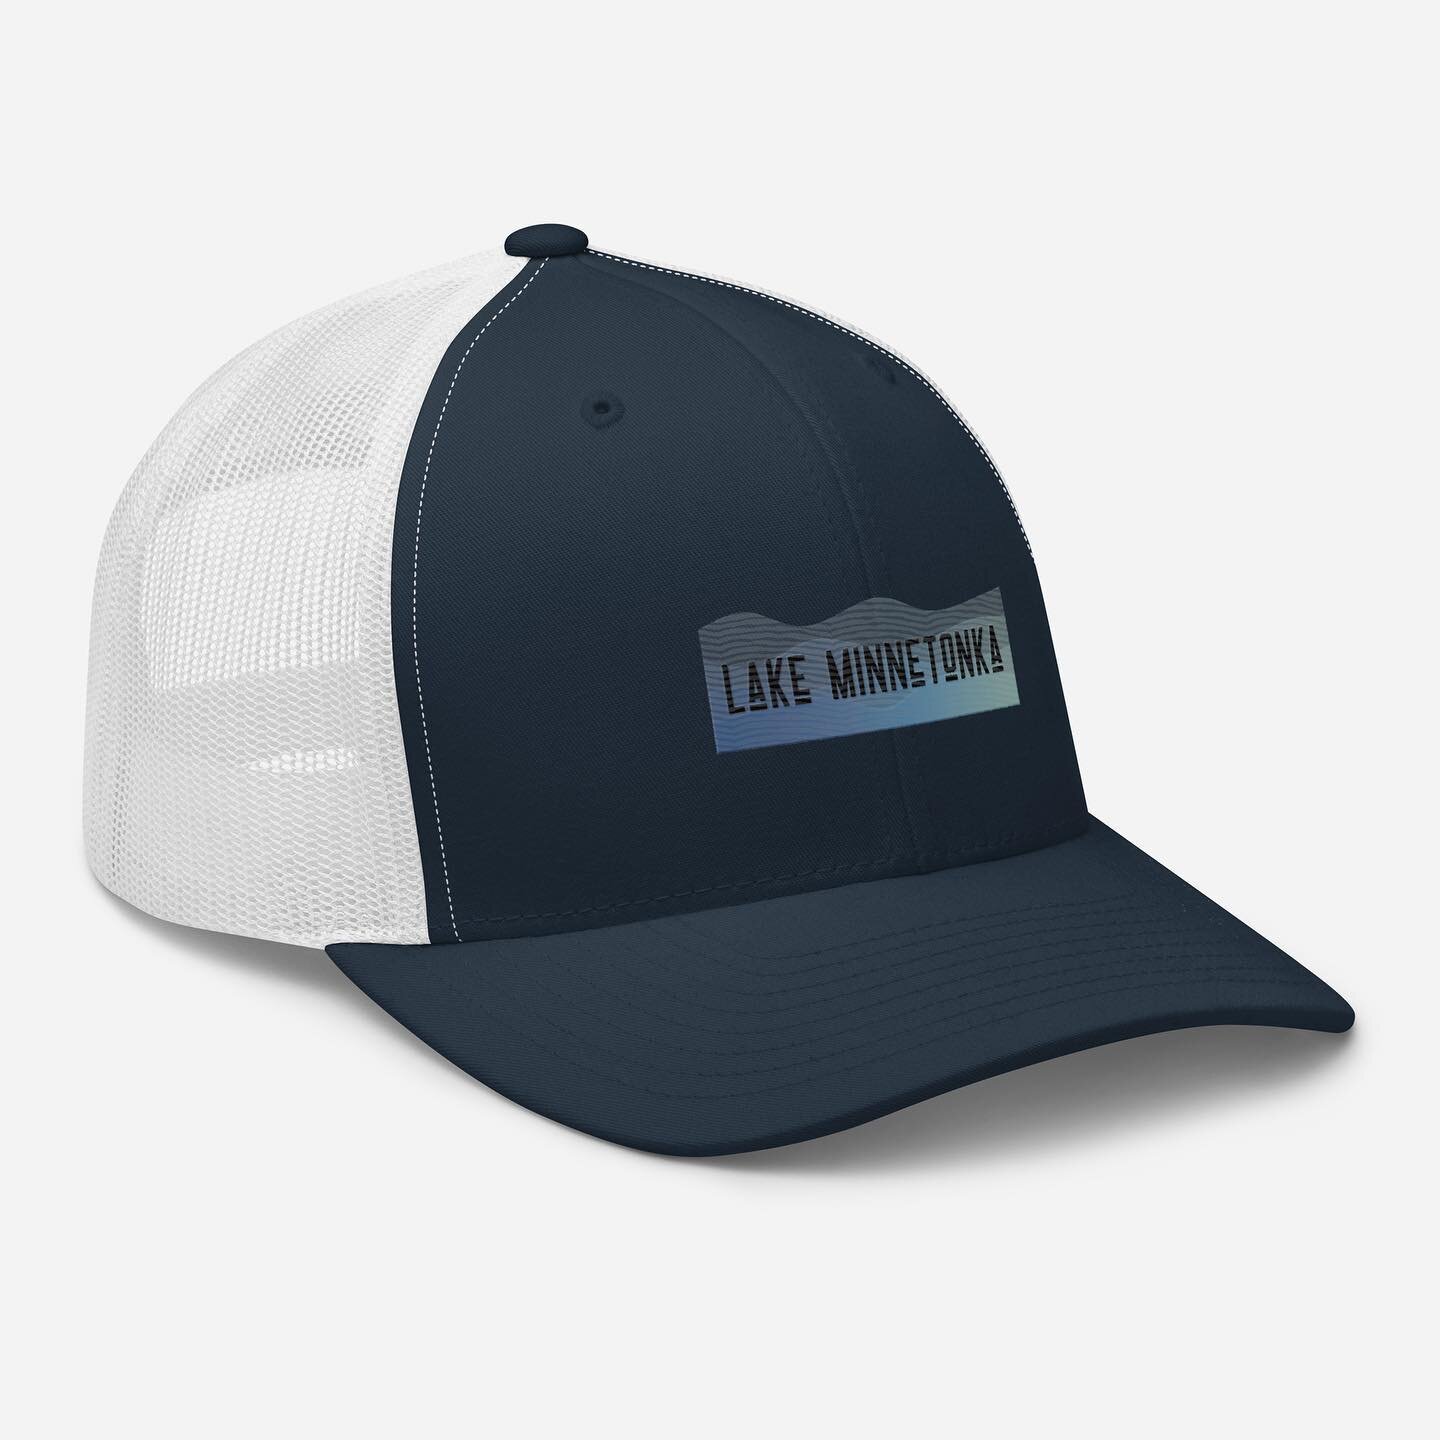 We're firm believers that everyone looks good in a trucker hat. This is why we created the Lake Minnetonka Trucker Cap for all! 🤍

#lakeminnetonka #lakelifeshop #mnlakes #boating #summerhat